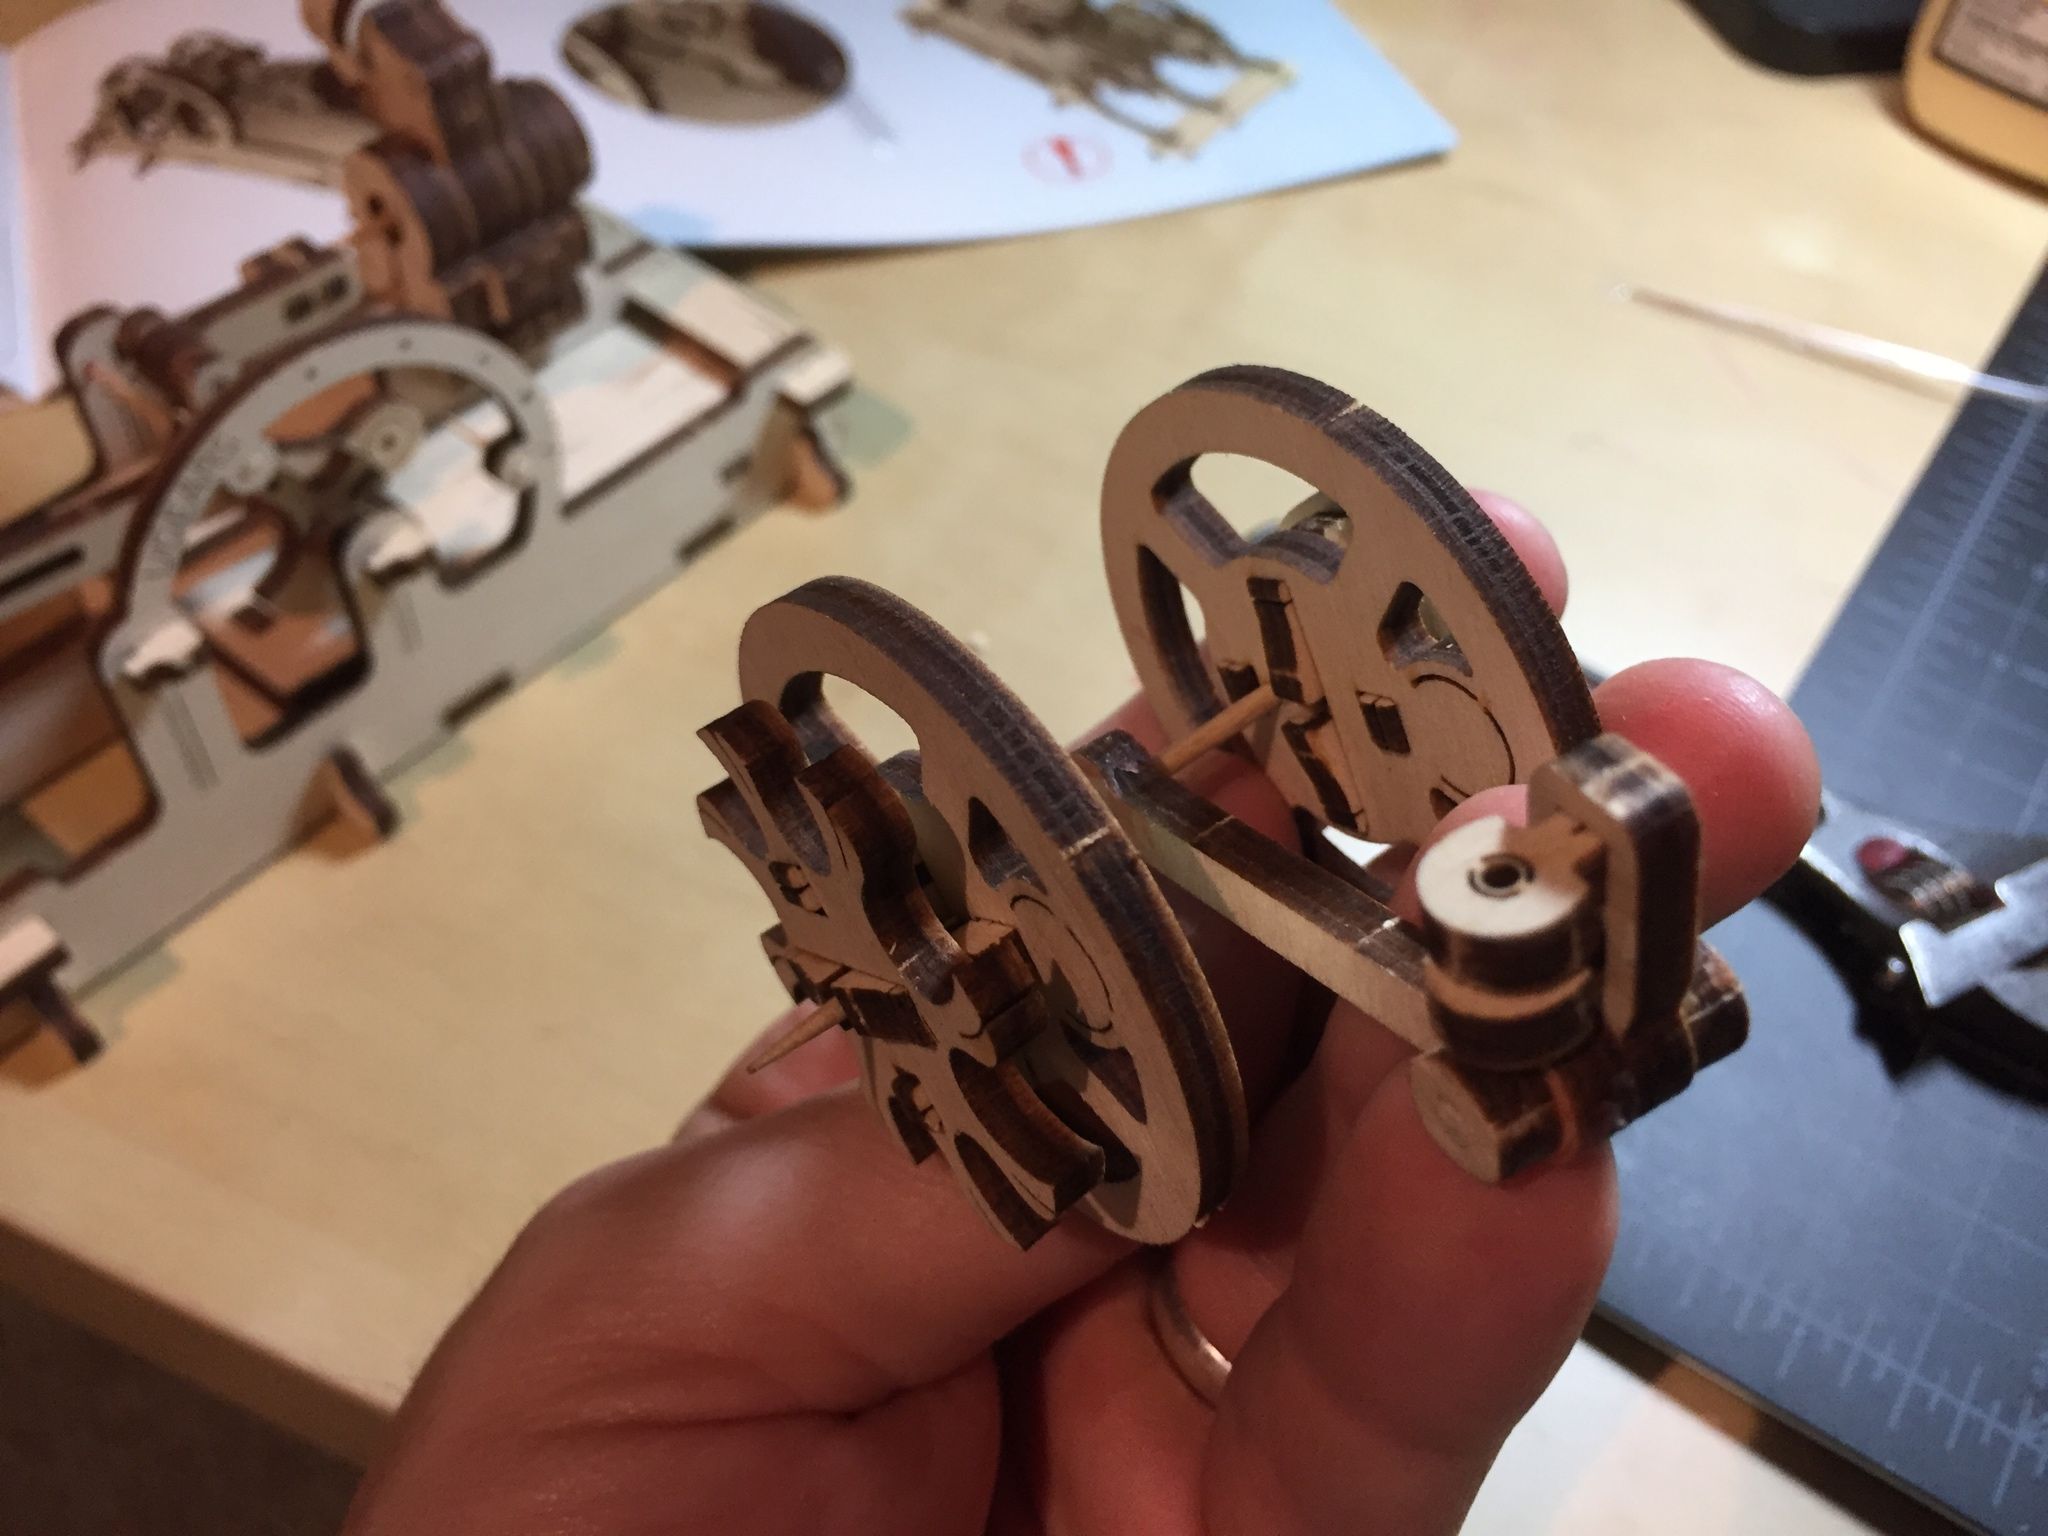 Enjoy the learning experience on how to assemble the pneumatic engine with Ugears model